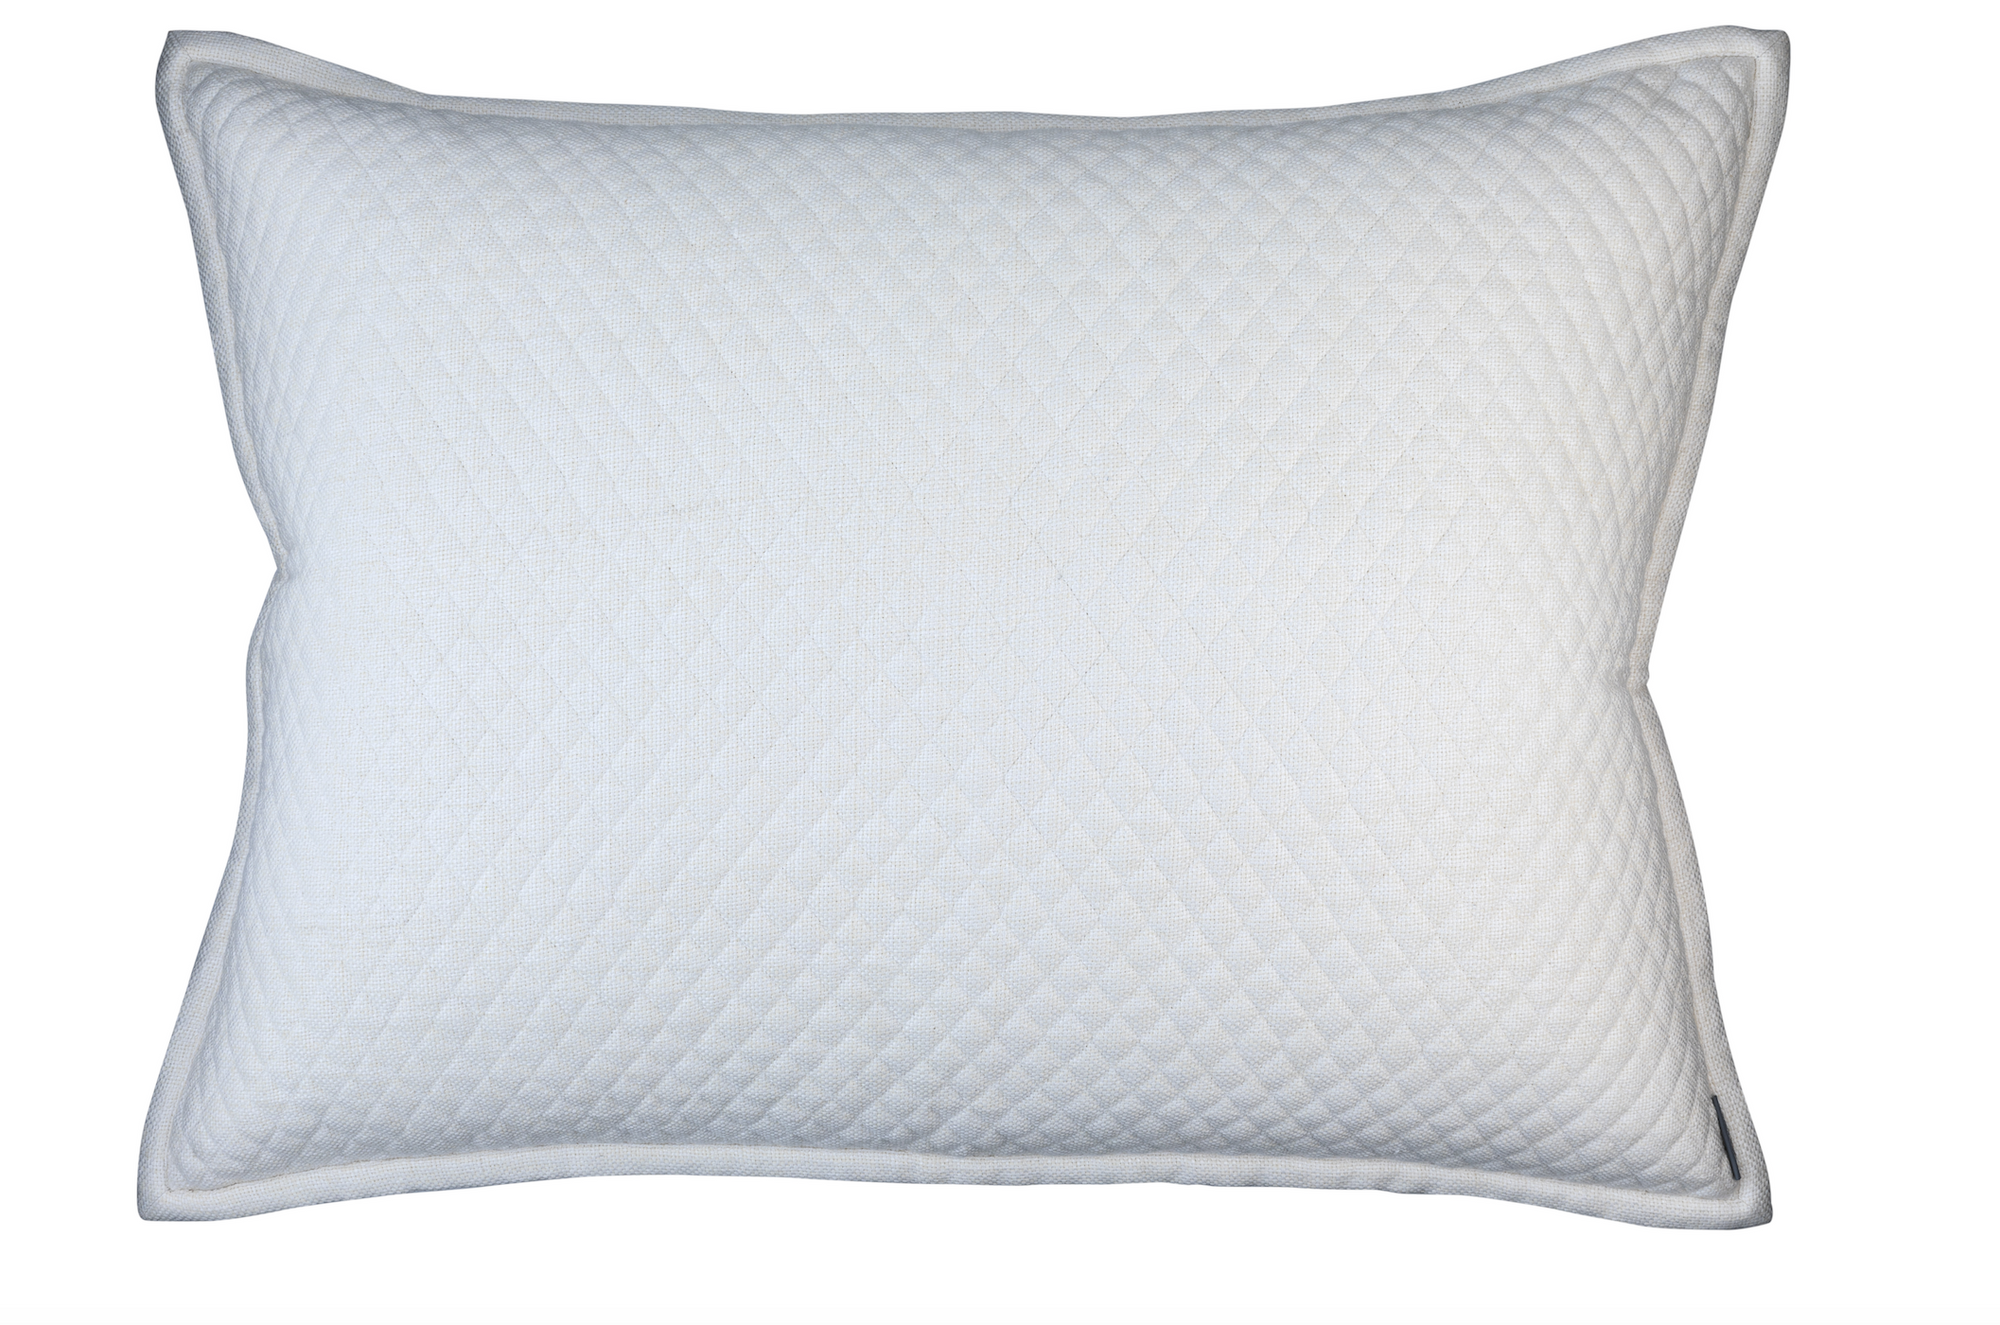 Lili Alessandra Laurie Quilted Ivory Basketweave Luxe Euro Pillow